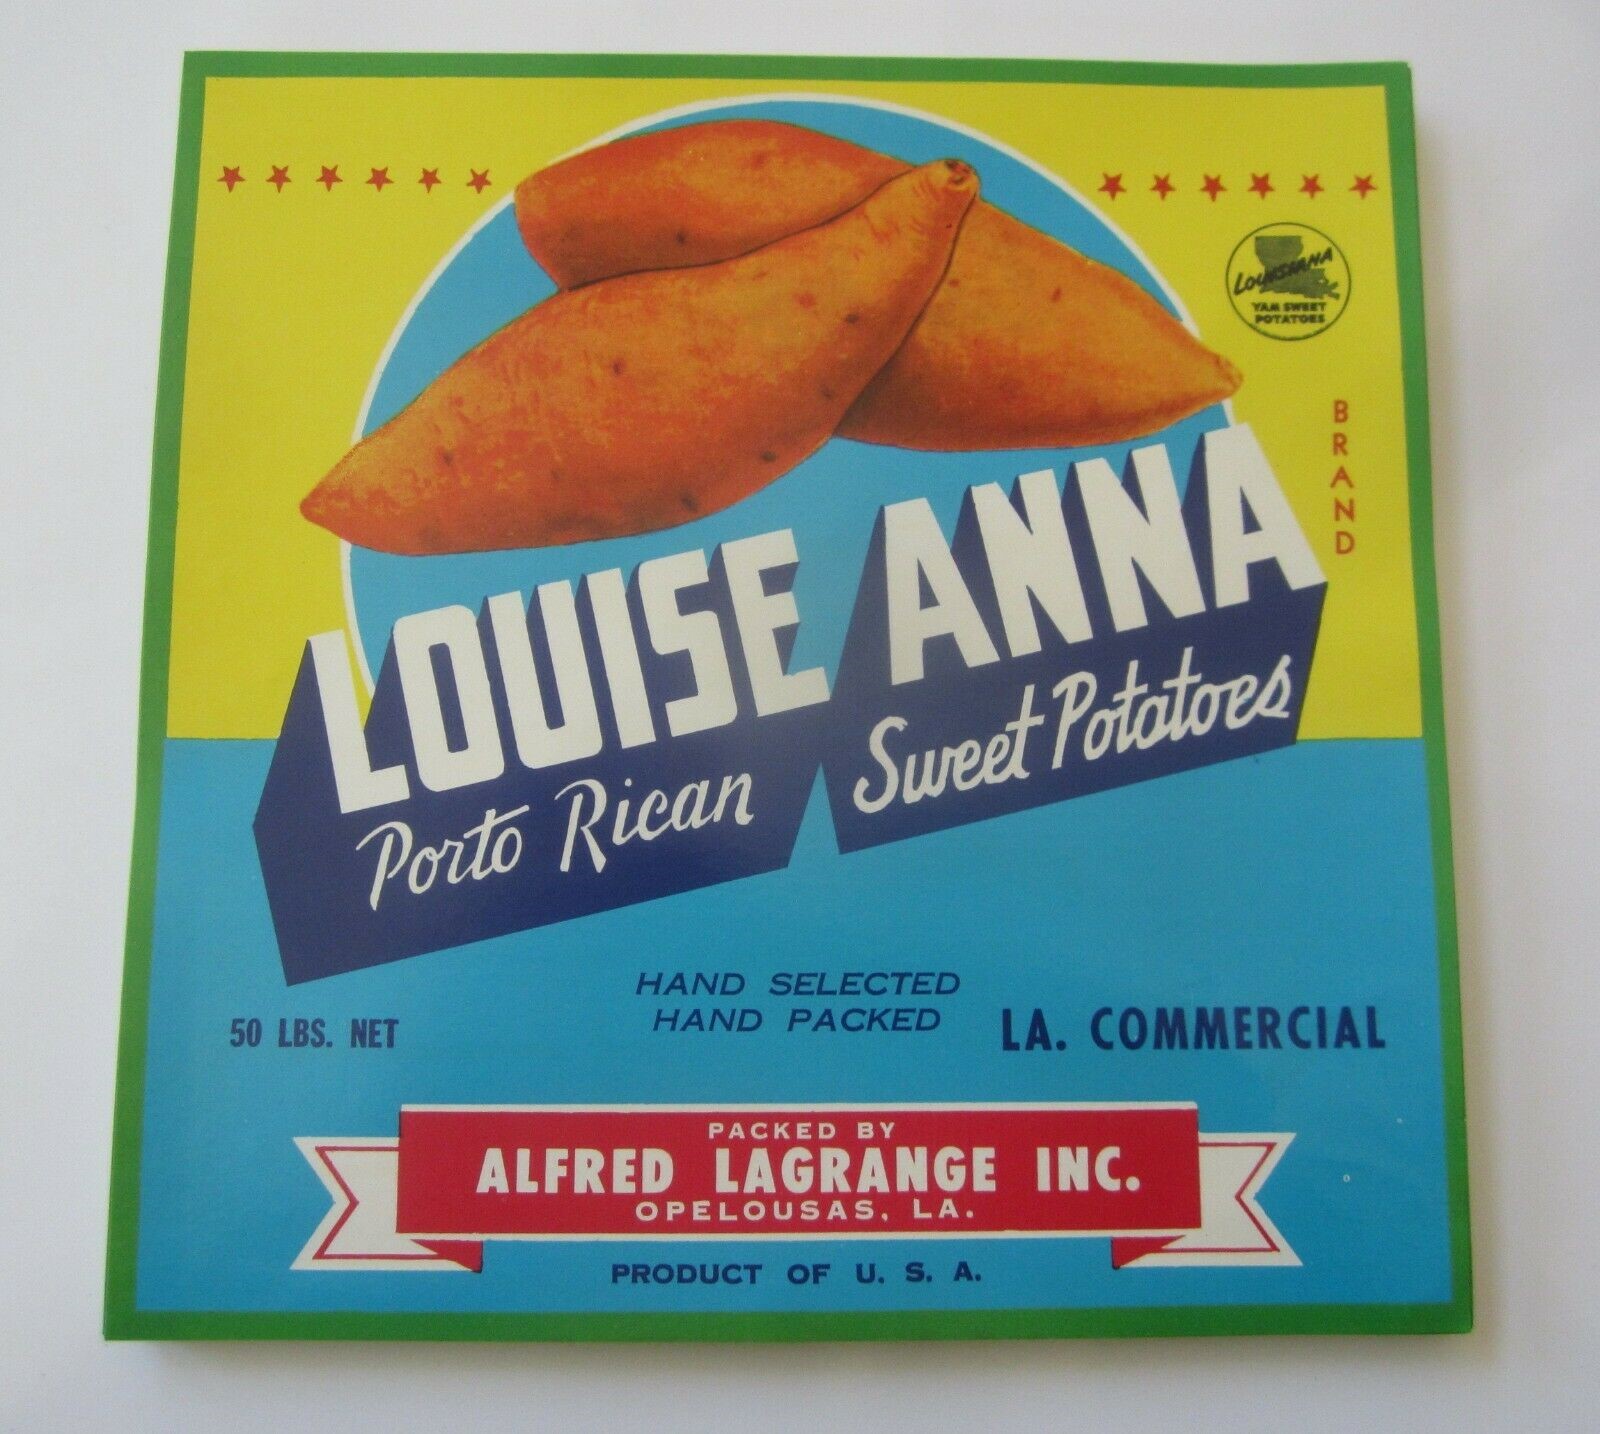  Lot of 100 Old Vintage - LOUISE ANNA Sweet Pot...